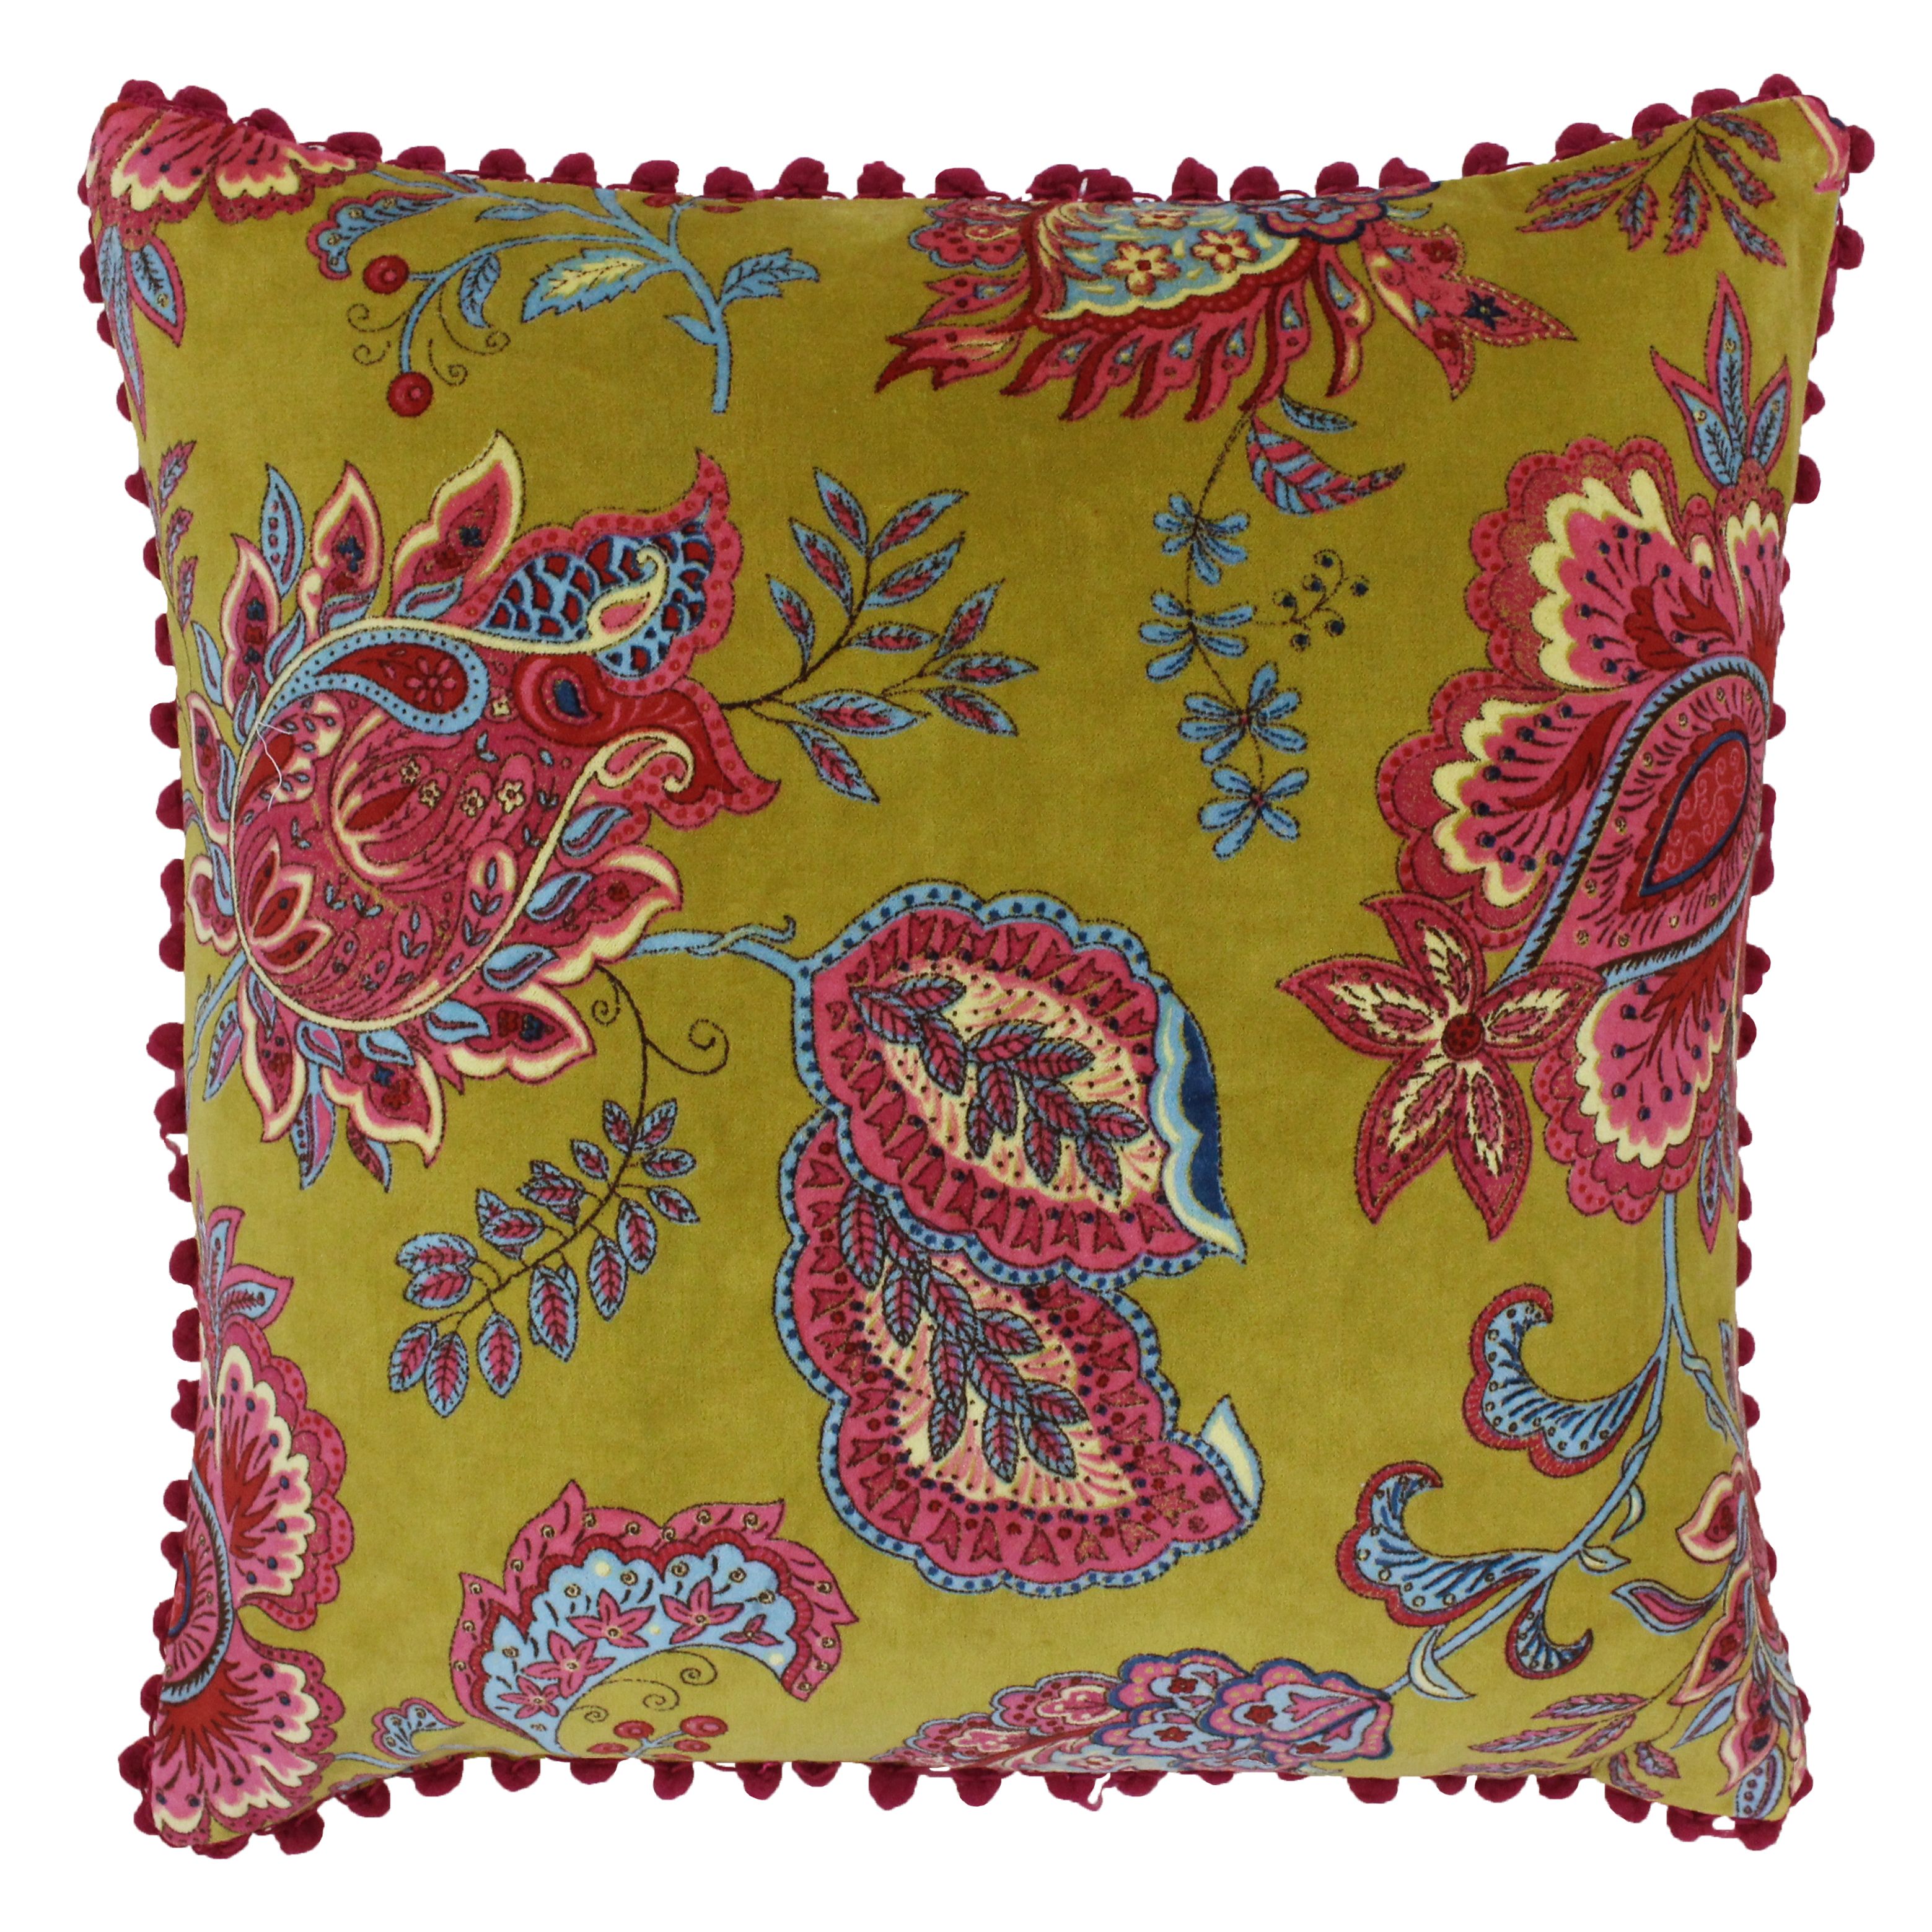 Made for the boho hippies found in all of us the Paoletti Malisa range brings together rich colours and sumptuous textures. The Malisa square Polyester Filled Cushion features a bright and detailed paisley Indian-inspired print of plants and flowers on a plain base that will bring a spark of botanical flair to any home interior. Featuring a faux velvet front and reverse these cushions are amazingly soft and will work fantastically on your sofa or bed. Each edge is embellished with contrasting pompoms adding to its character and a hidden zip closure stops anything from detracting from its unique design. This Polyester Filled Cushion has been lovingly made from 100% high-quality cotton giving it that notable cotton softness. Easy to care for this cushion is machine washable at 30 degrees. Use a warm iron and tumble dry on a low setting for the best finish.